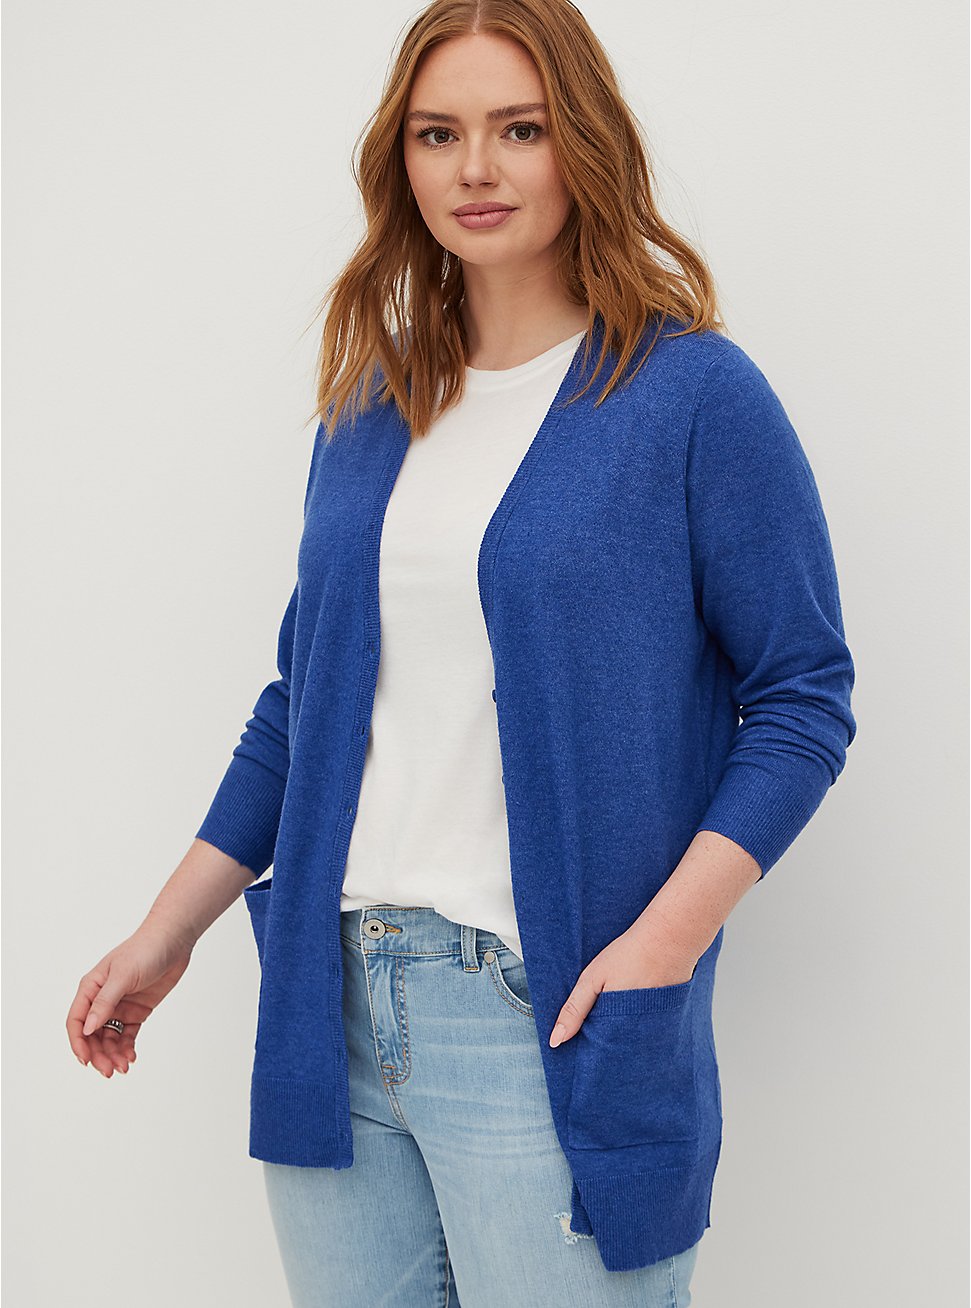 Button Front Cardigan Sweater - Luxe Cozy Navy, BLUE, hi-res